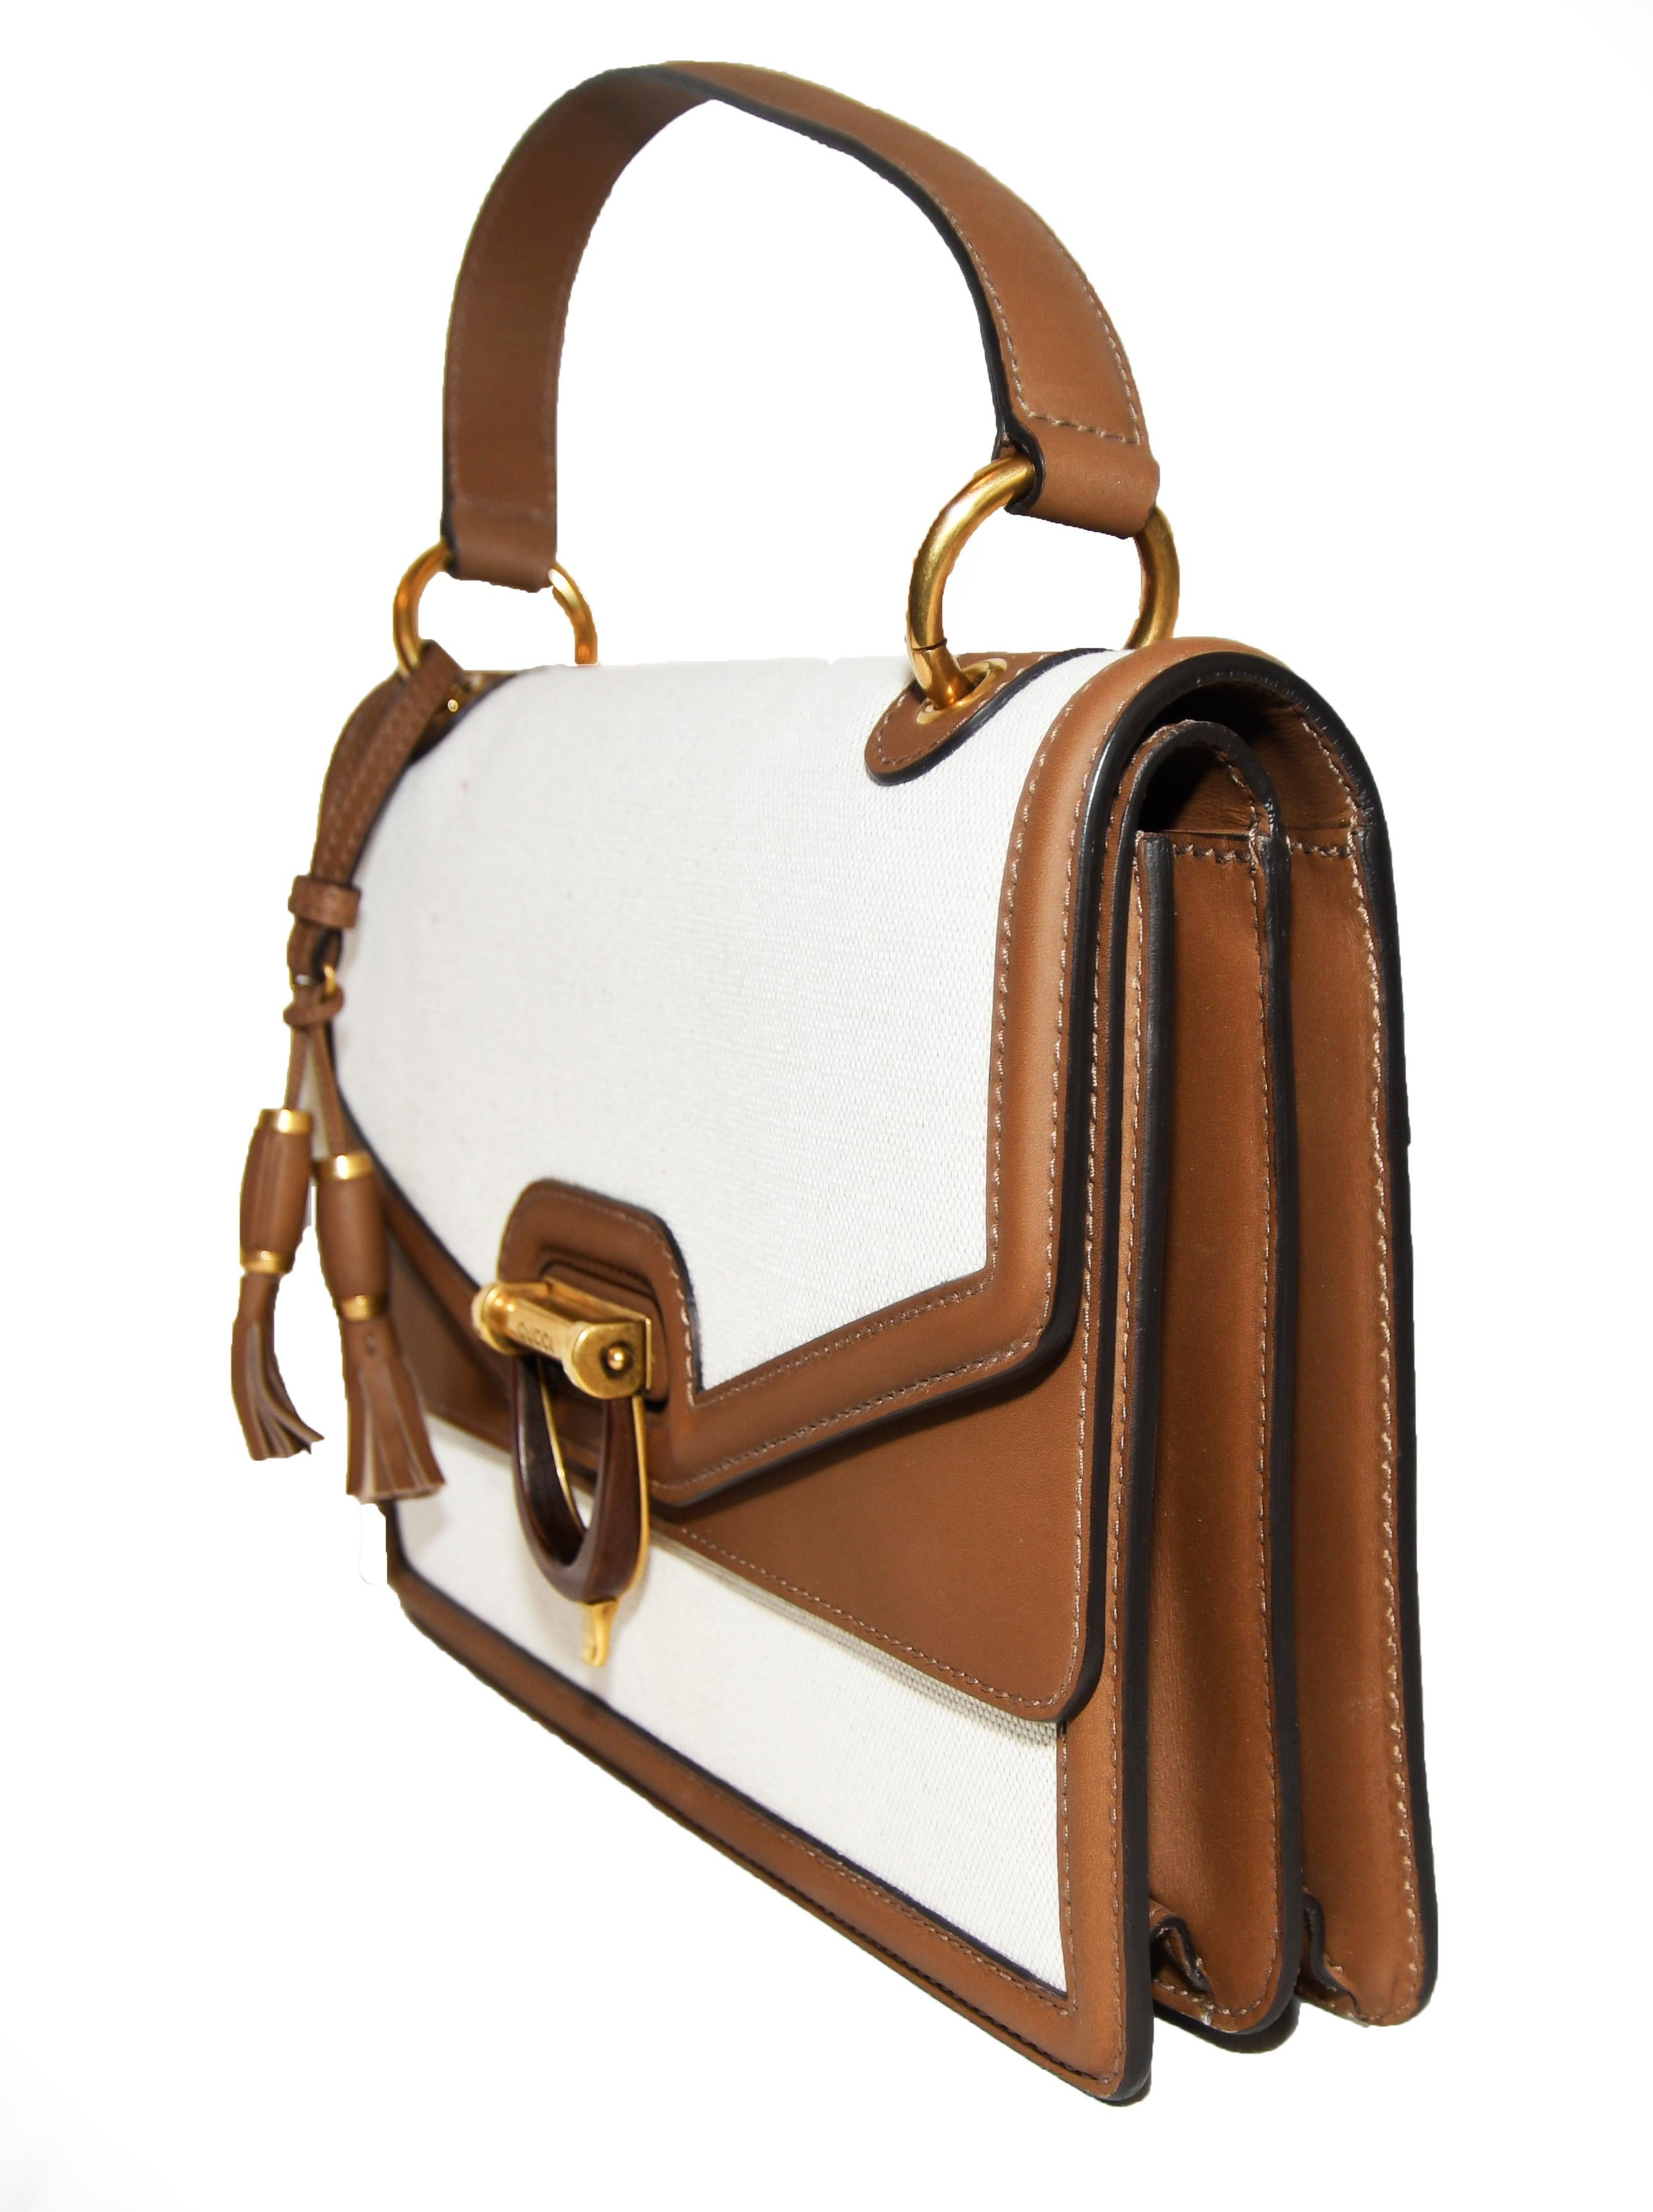 Gucci Derby canvas in beige and trimmed in brown leather bag has one brown leather top handle with decorative tassel on handle ring.  This double flap bag includes a horse bit turn down closure at front.  All the hardware is a semi matte gold tone. 